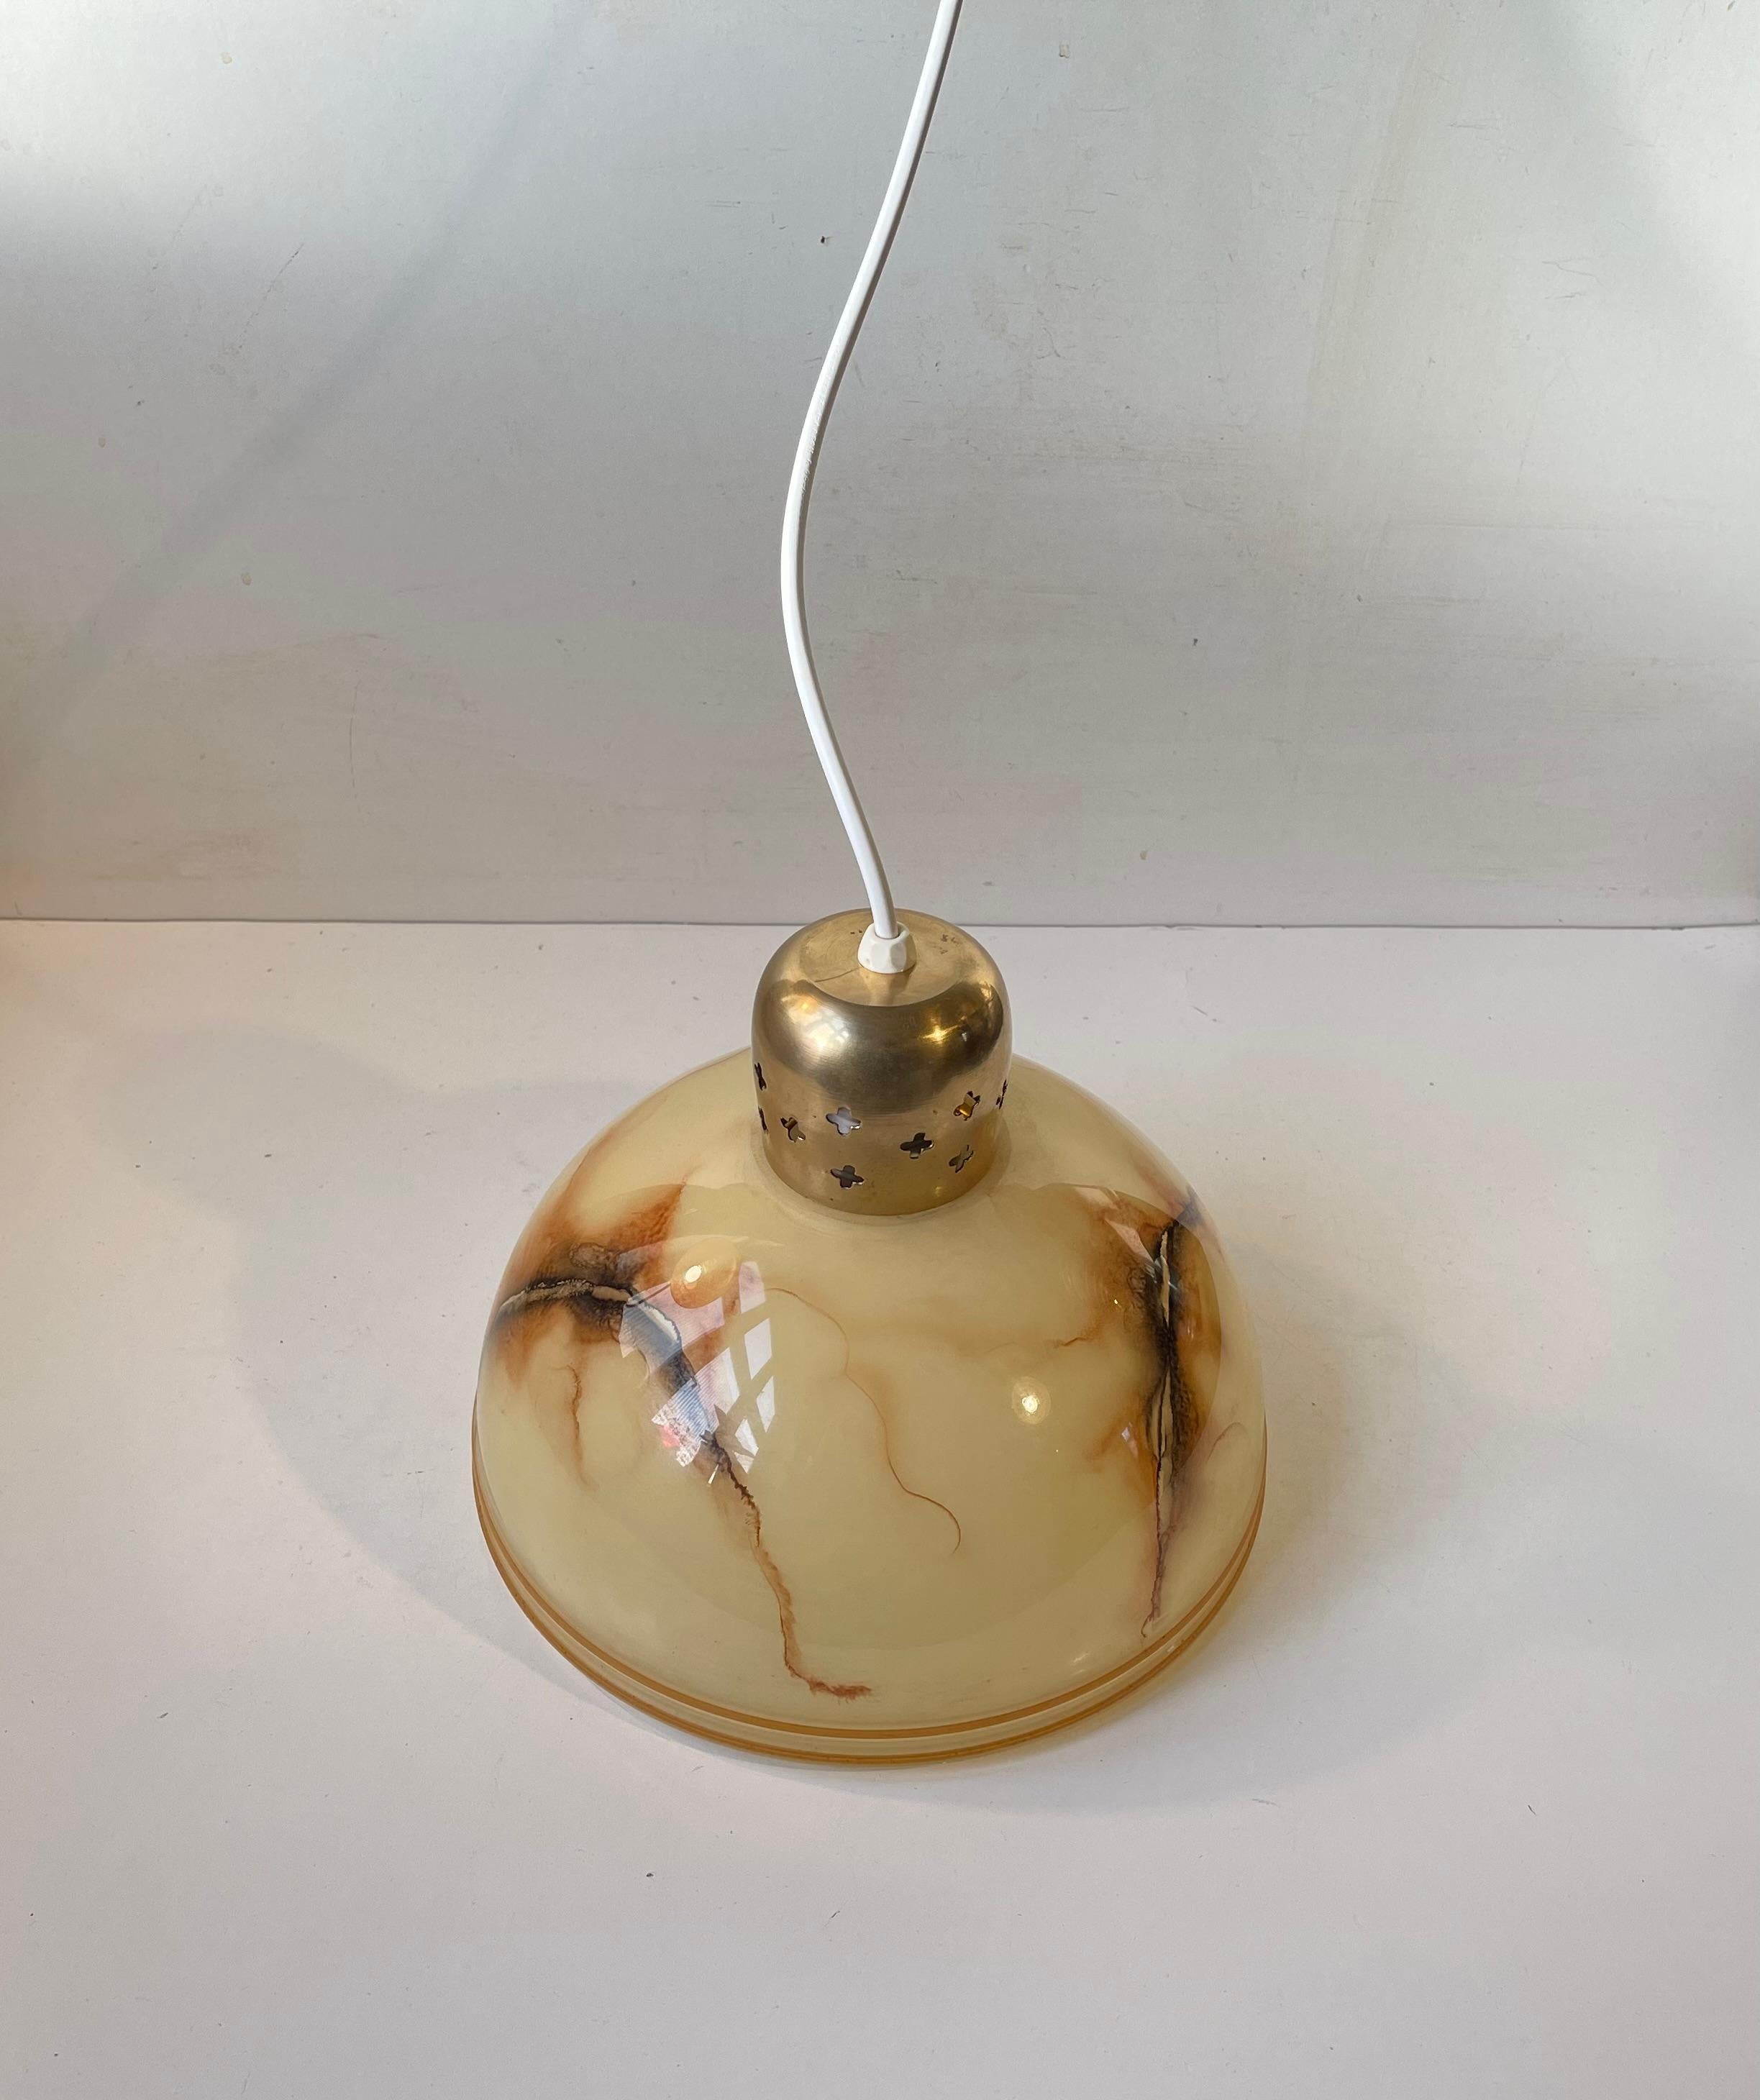 Danish art deco/functionalist pendant light partially perforated solid brass and marbled glass. It was manufactured in Denmark during the mid-late 140s. New and secure wire and fitting has been installed. Measurements: H: 20 cm, Diameter: 23 cm.